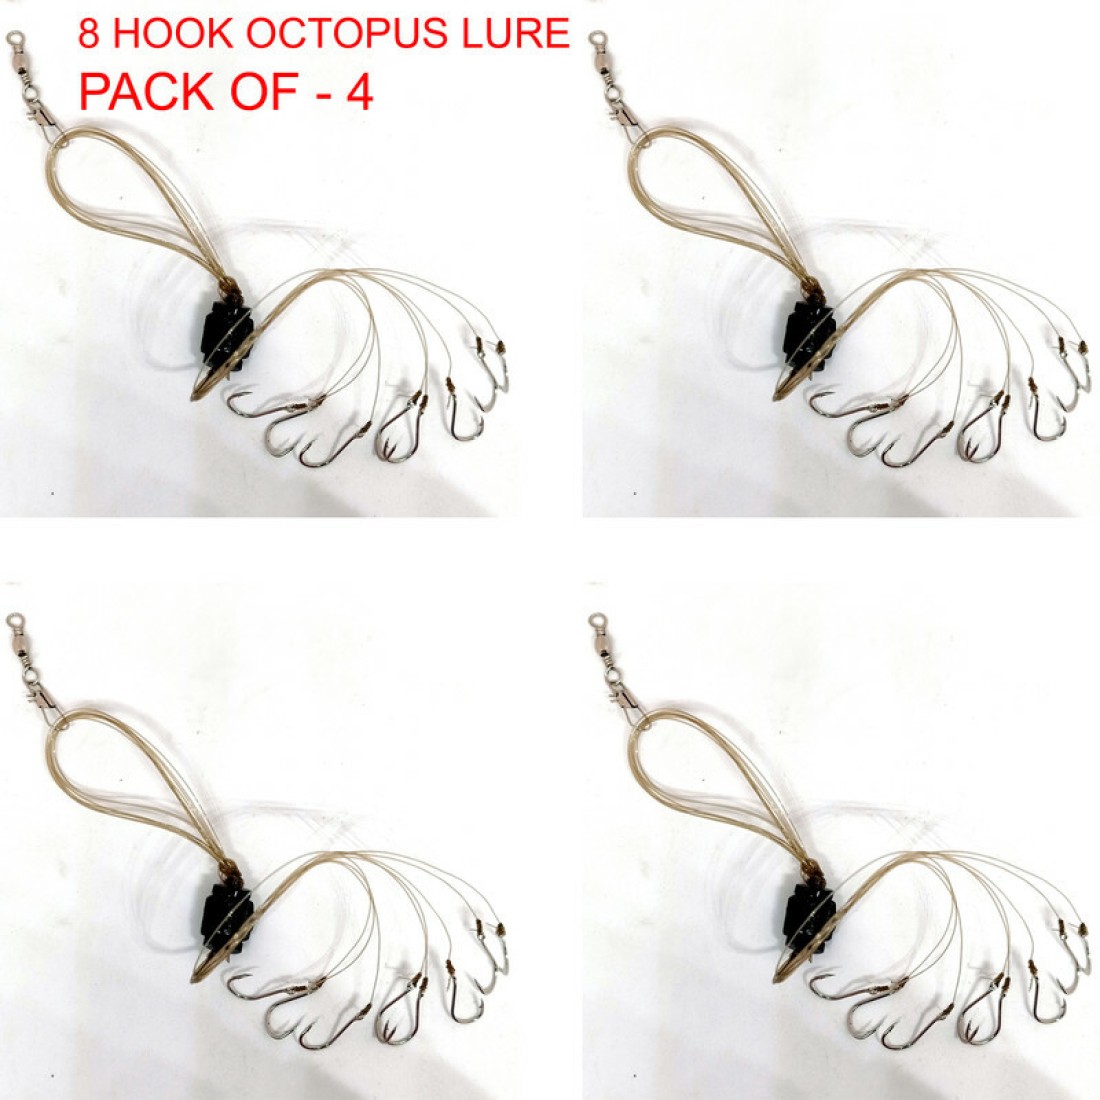 CORAL INDIA Octopus Fishing Hook Price in India - Buy CORAL INDIA